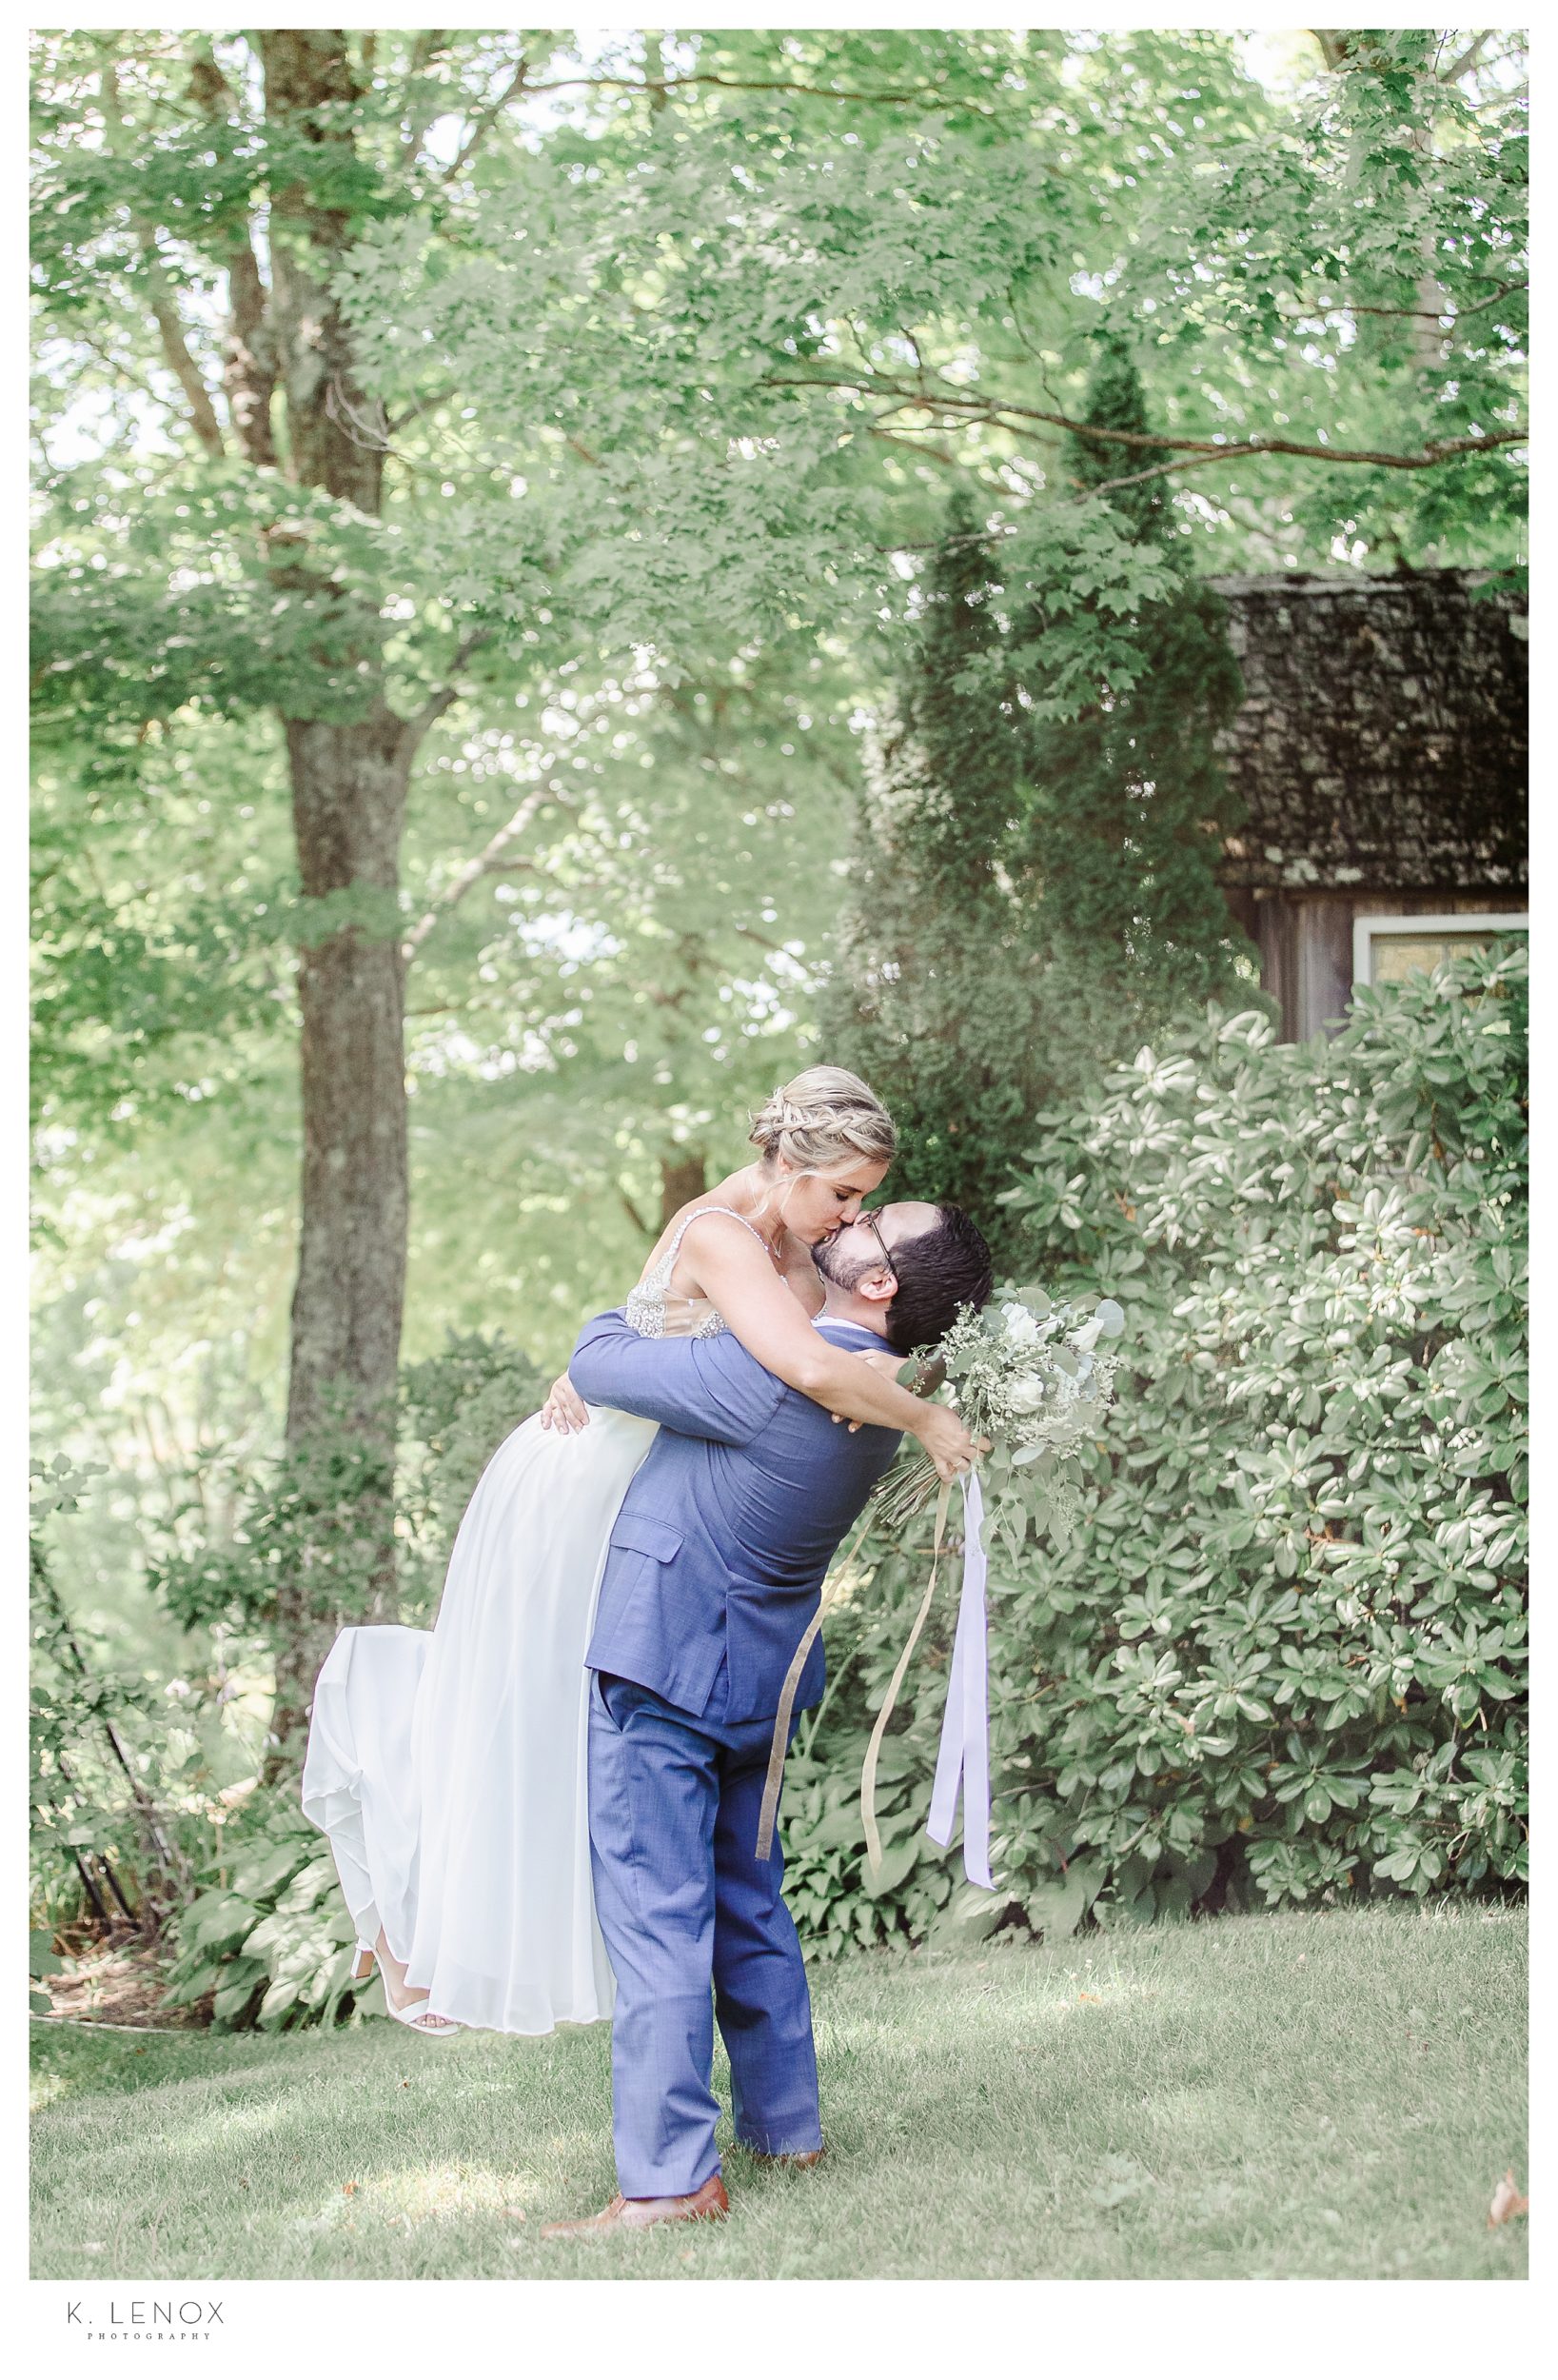 Light and Airy Intimate Wedding at Moran Estates- Bride and Groom spin together in happiness. 